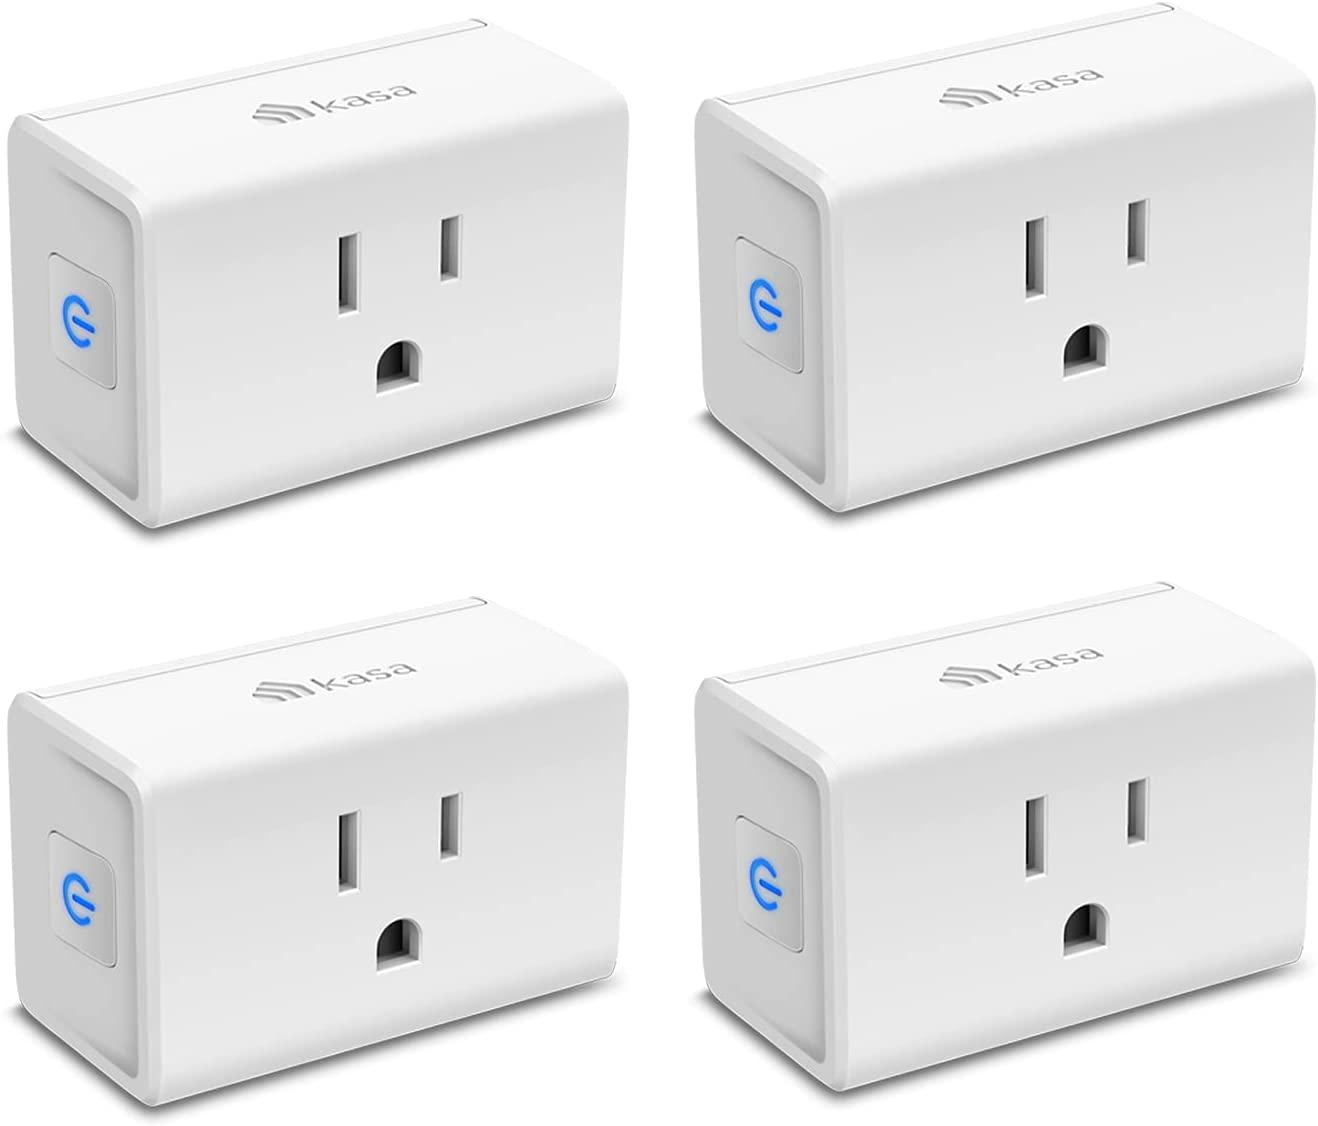 4 TP-Link Kasa Smart Plugs for $18.99